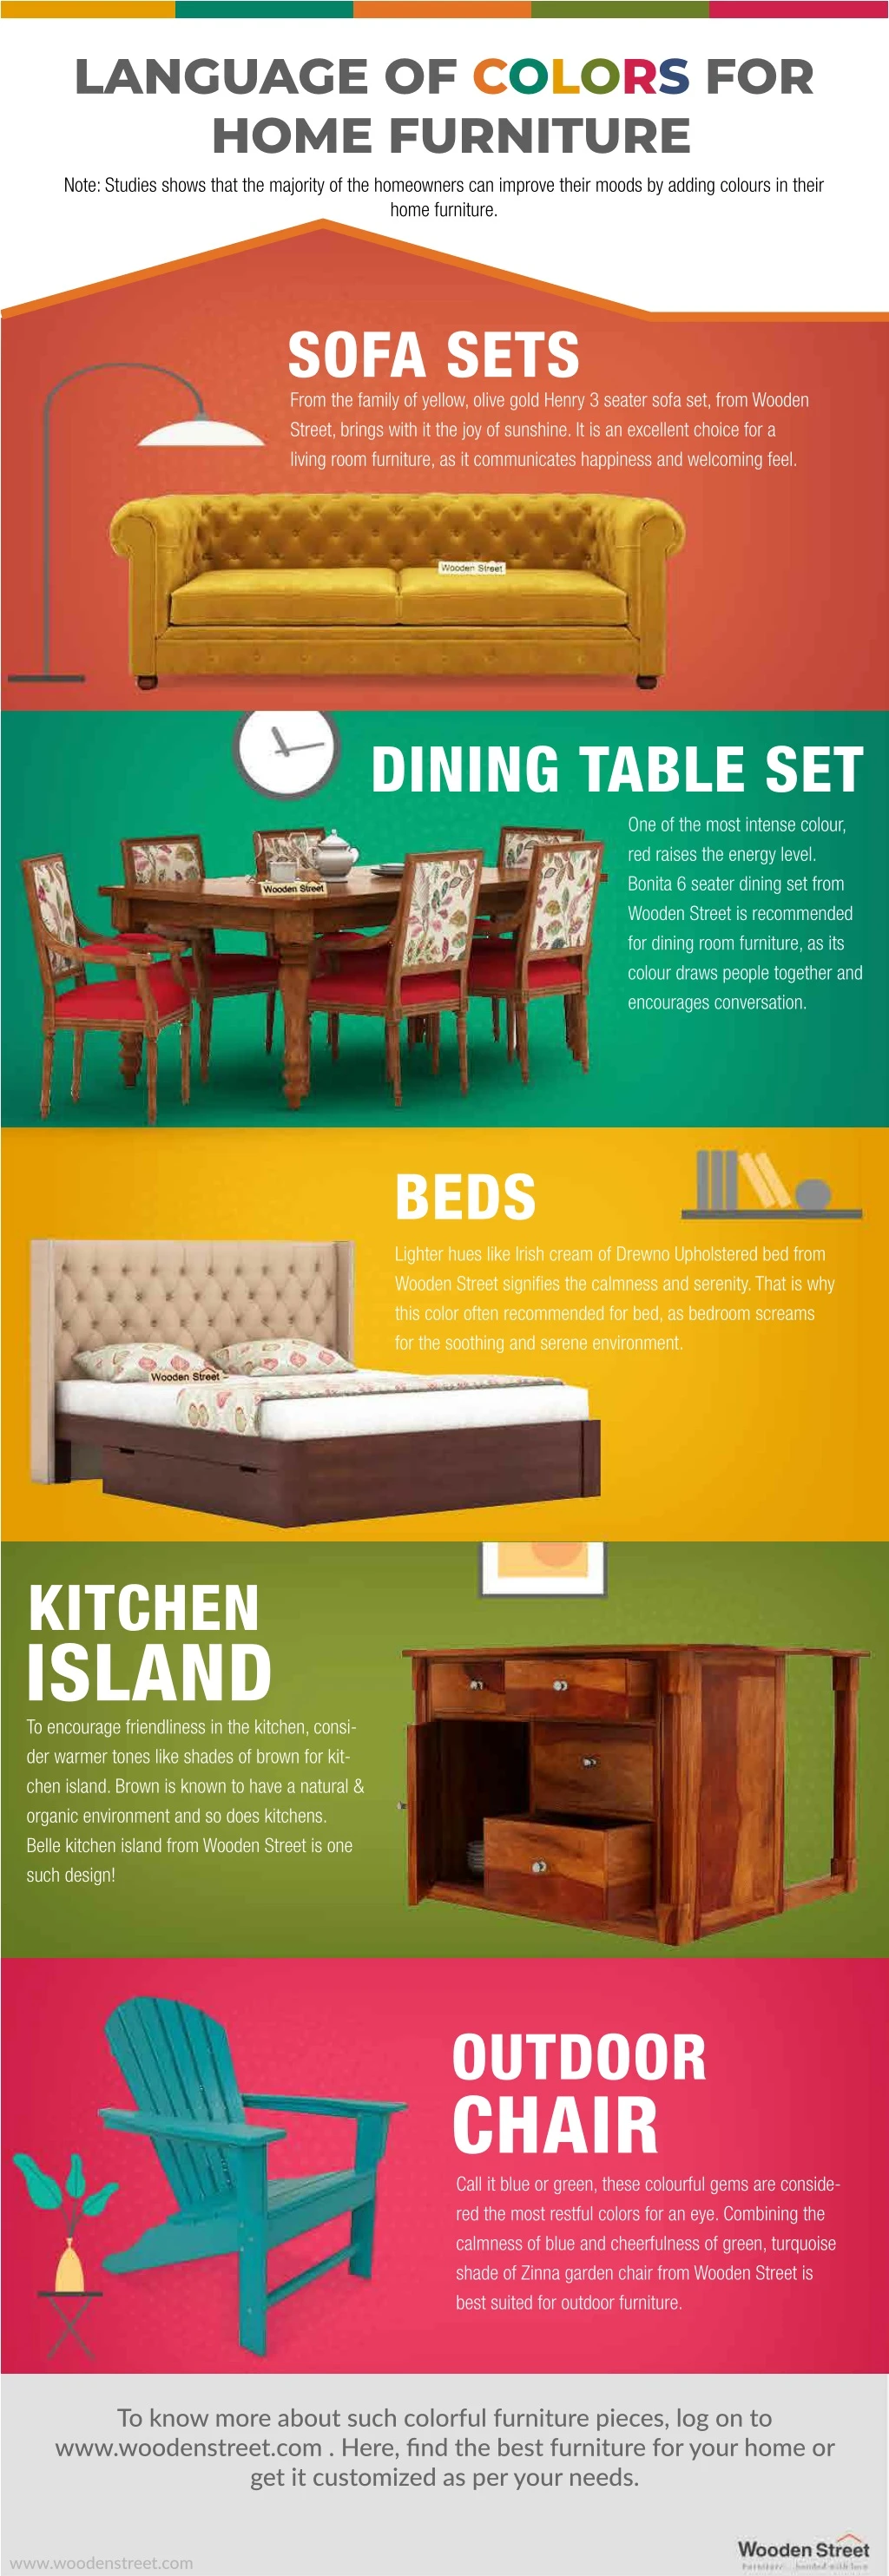 language of colors for home furniture note